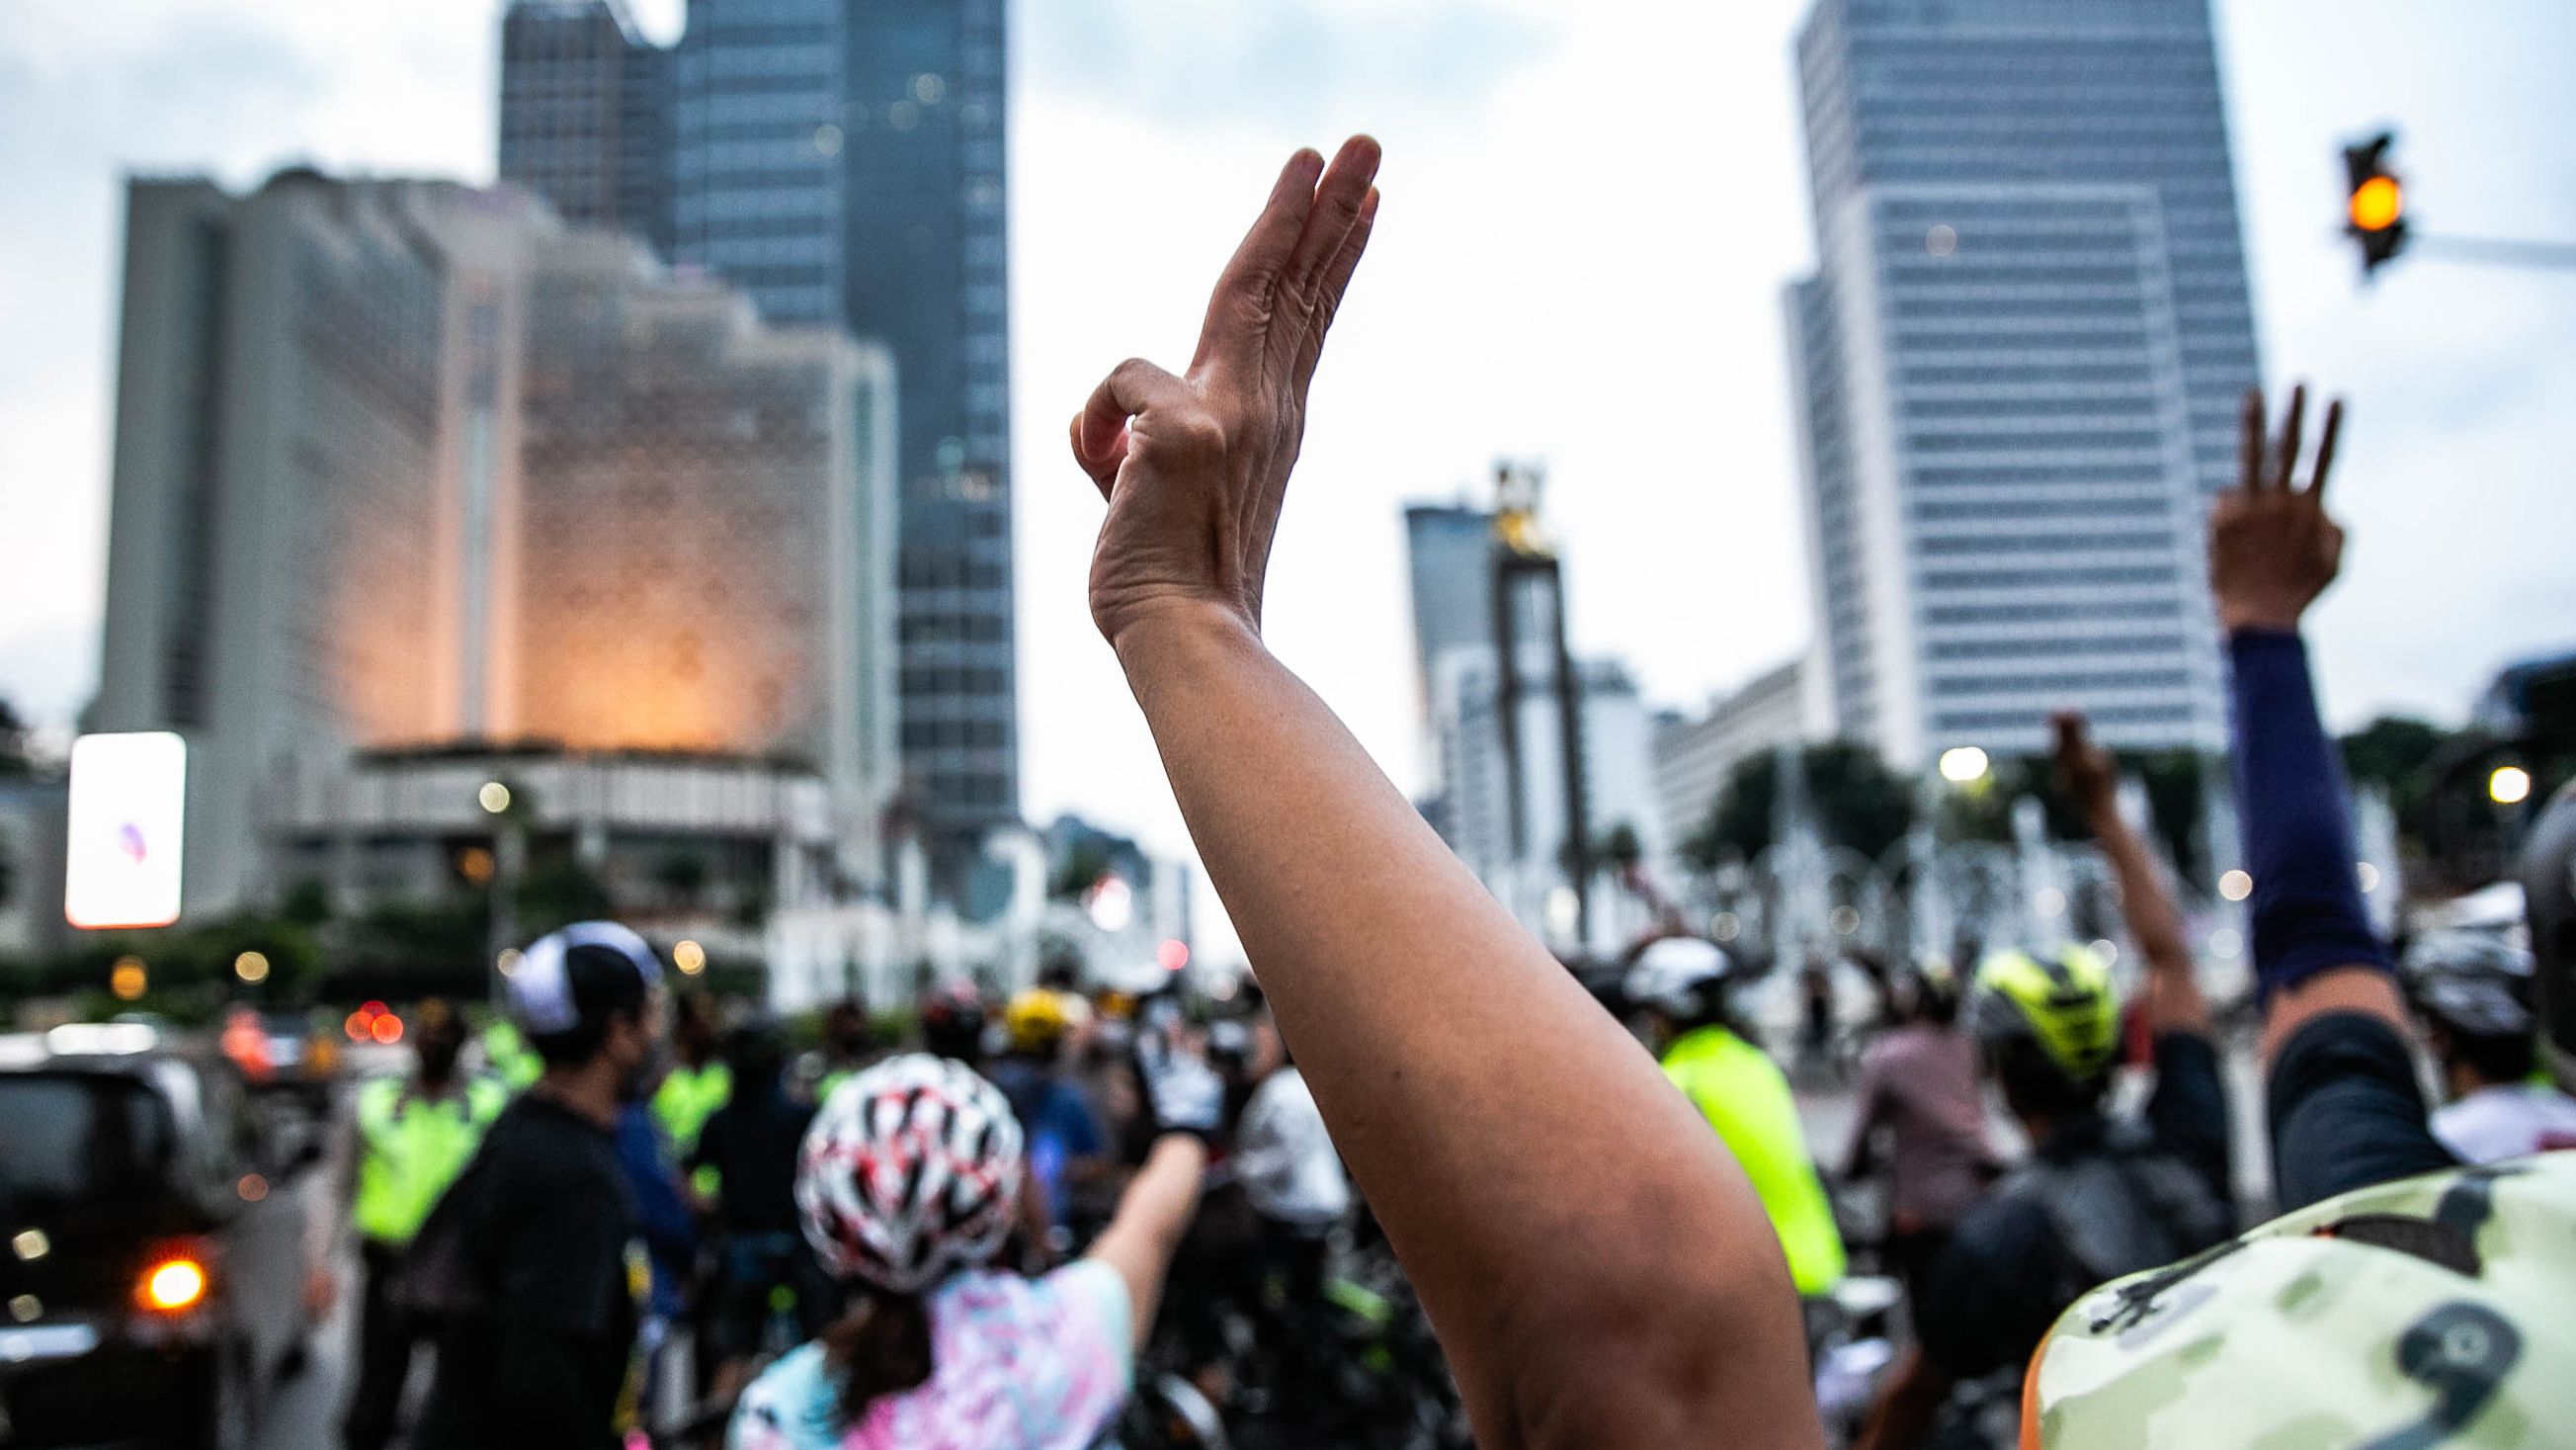 Indonesian bikers during a protest against the Myanmar military coup outside ASEAN secretariat building in Jakarta, Indonesia, on April 17.